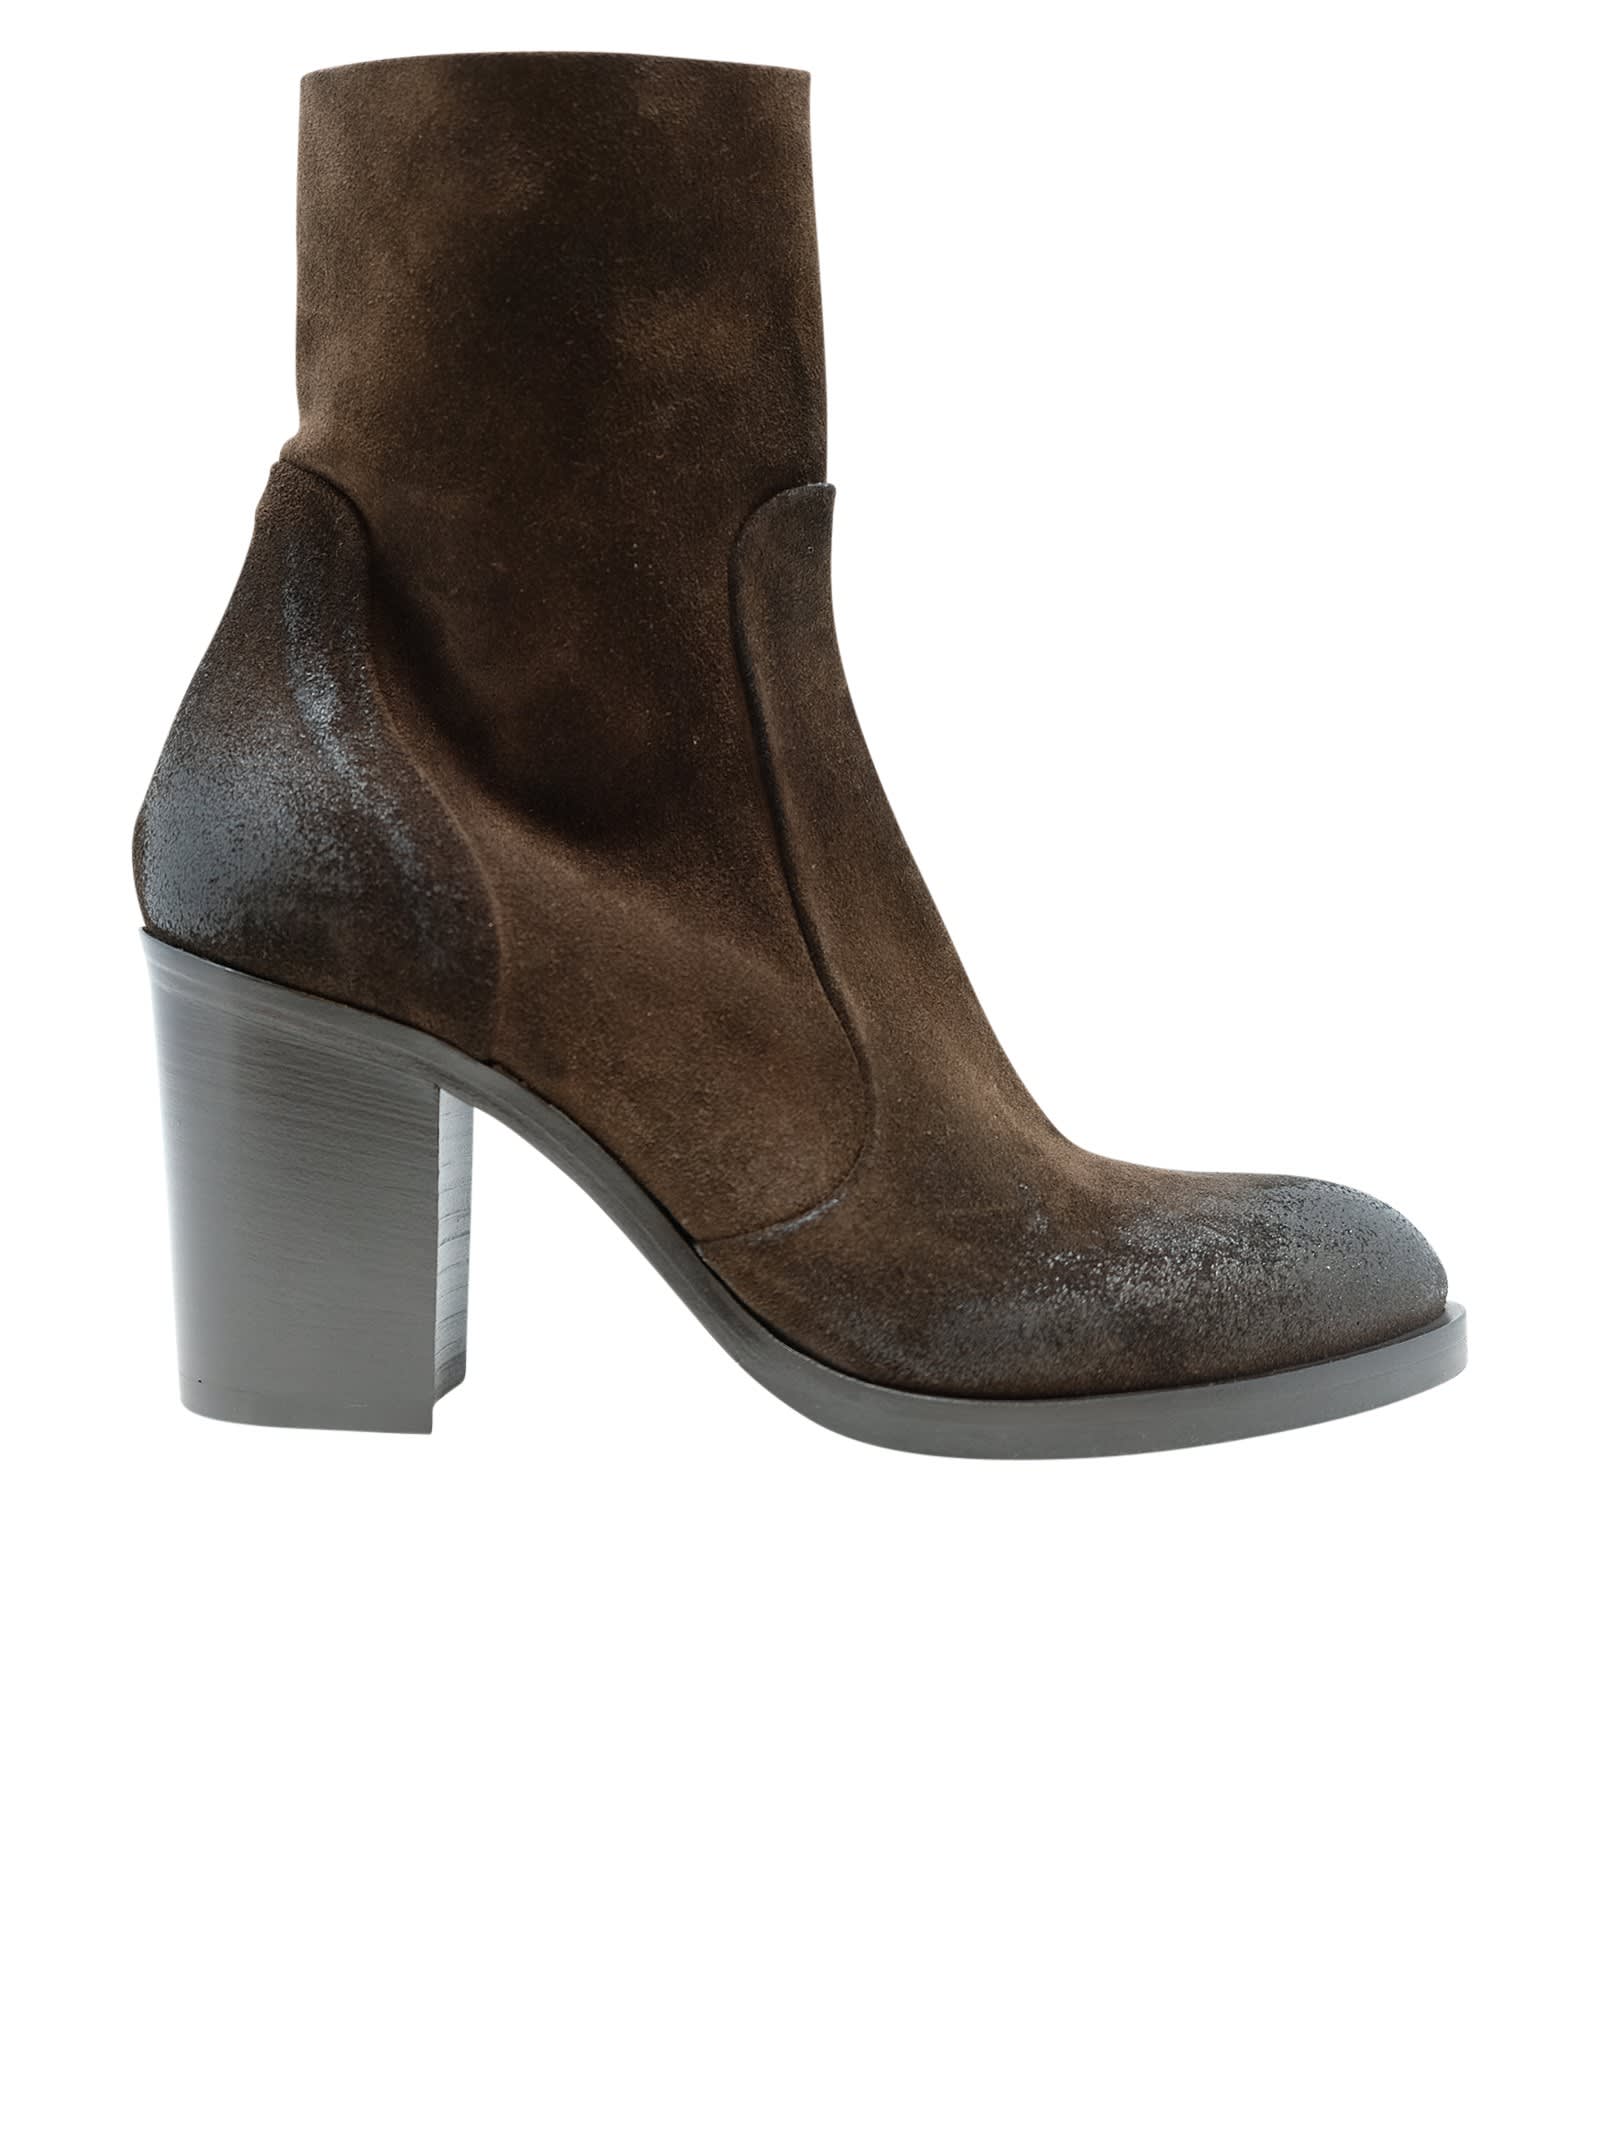 Elena Iachi Suede Leather Ankle Boots